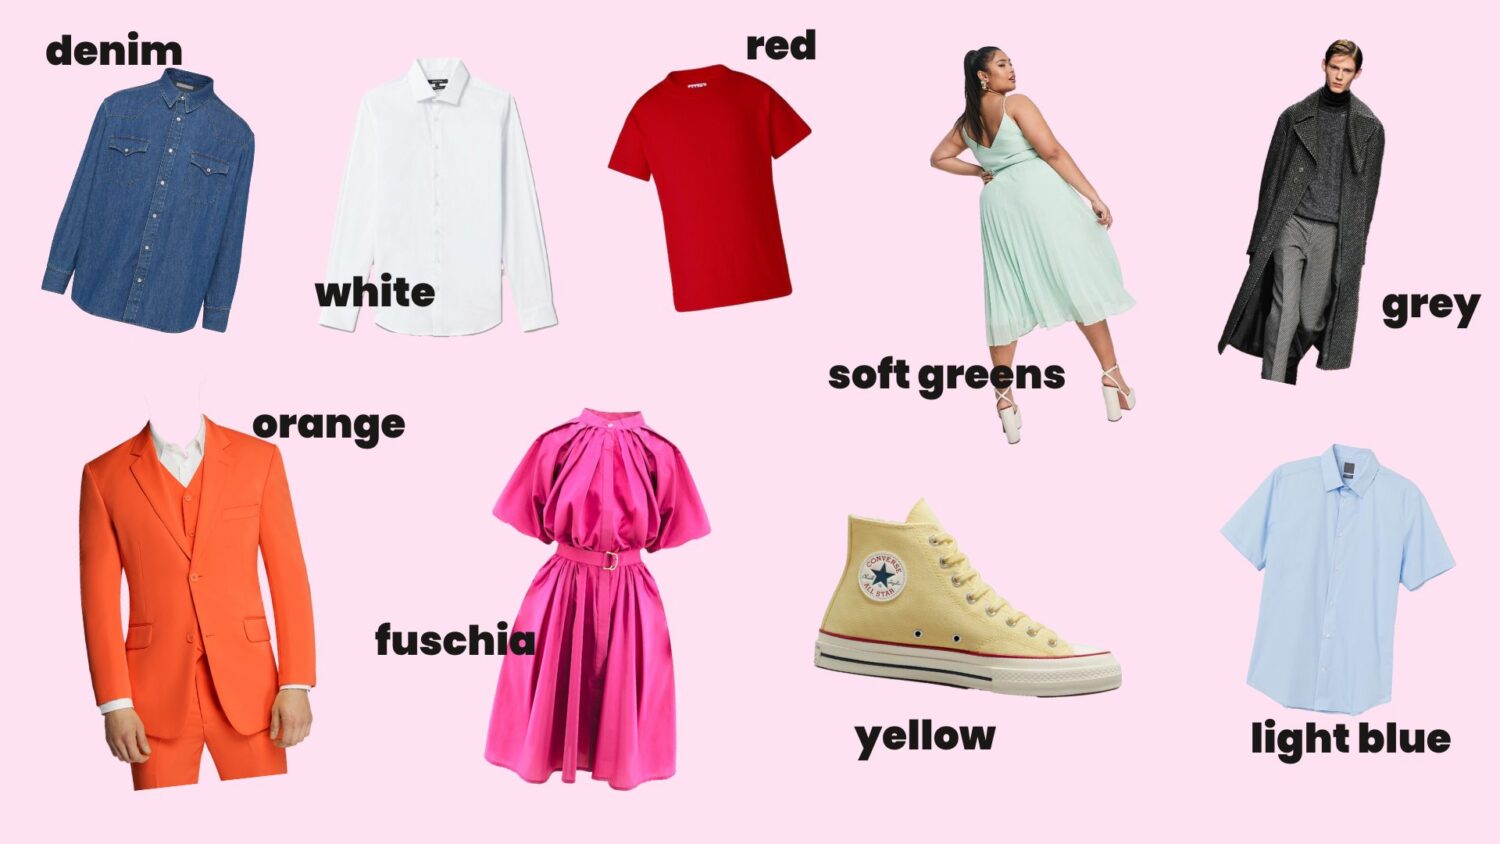 Flat-lay mockup or ideas of clothes to pair with pink.  It shows: denim, white, red, soft greens, grey, orange, fuschia, yellow, light blue.